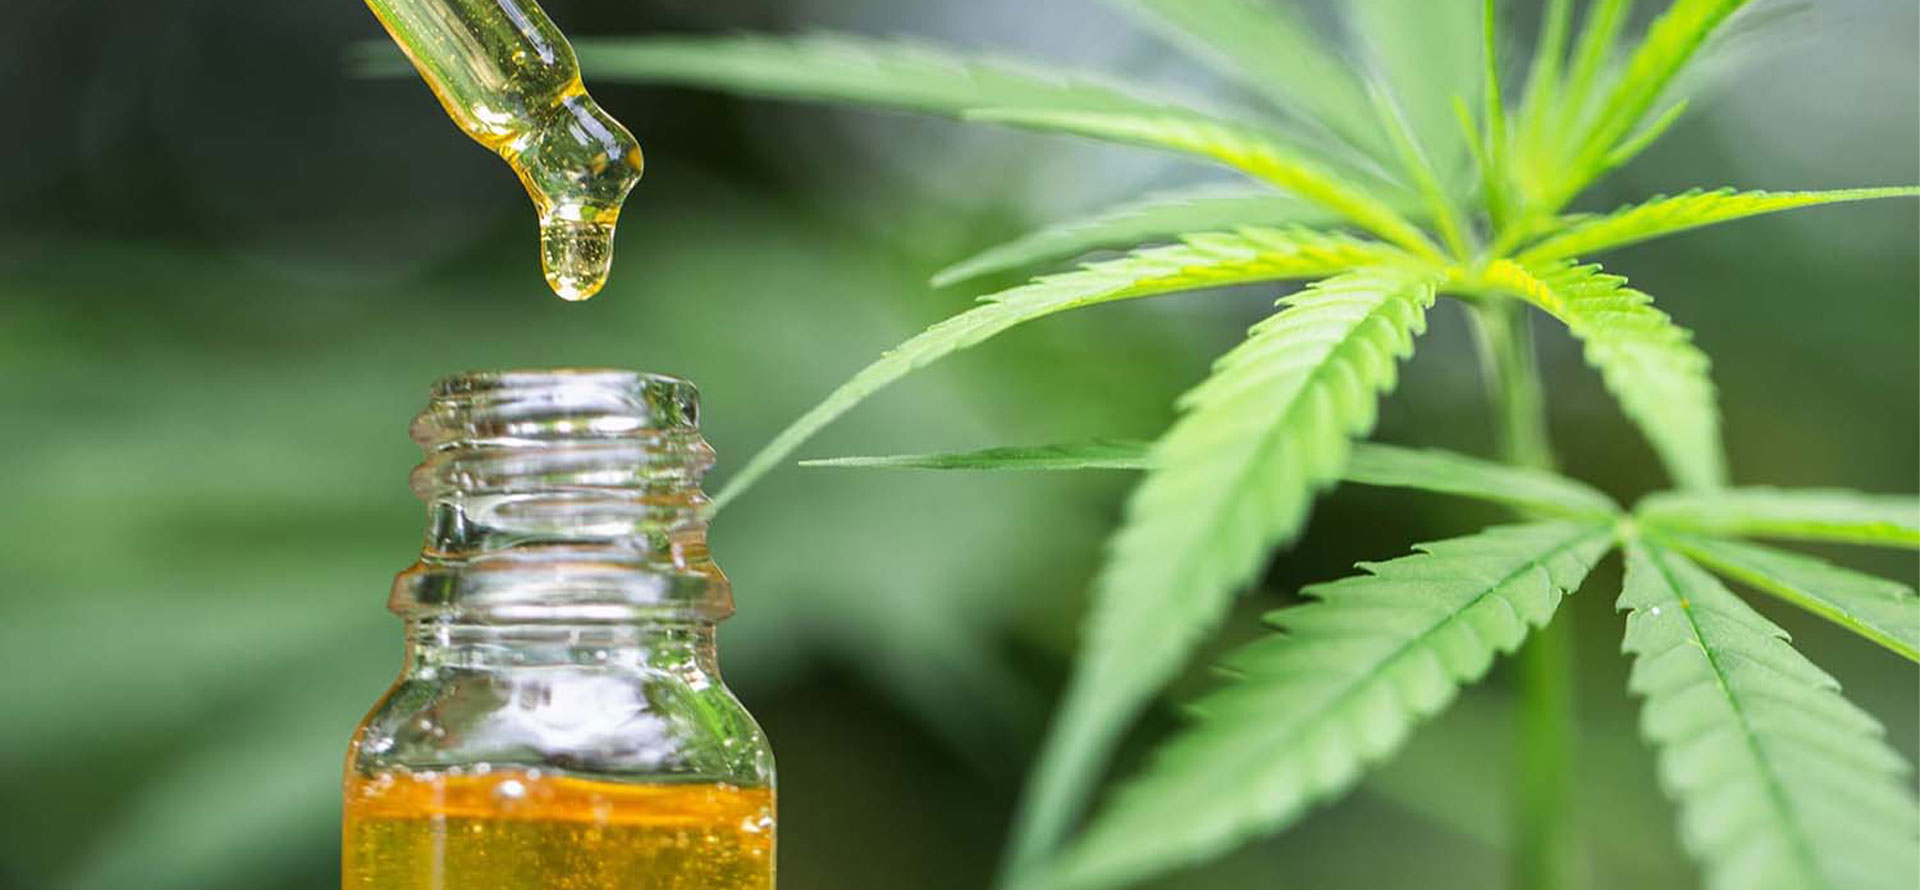 BEST CBC OIL FOR PAIN COLORADO GROWN HEMP - Cbd|Oil|Benefits|Cbc|Effects|Pain|Study|Health|Thc|Products|Cannabinoids|Studies|Research|Anxiety|Cannabis|Symptoms|Evidence|People|System|Disease|Treatment|Inflammation|Hemp|Body|Receptors|Disorders|Brain|Plant|Cells|Side|Effect|Blood|Patients|Cancer|Product|Skin|Marijuana|Properties|Cannabidiol|Cannabinoid|Cbd Oil|Cbd Products|Cbc Oil|Side Effects|Endocannabinoid System|Chronic Pain|Multiple Sclerosis|Pain Relief|Cannabis Plant|Cbd Oil Benefits|Blood Pressure|Health Benefits|High Blood Pressure|Anti-Inflammatory Properties|Neuropathic Pain|Animal Studies|Hemp Plant|Hemp Oil|Anxiety Disorders|Cbd Product|Immune System|Clinical Trials|Cbd Gummies|Nerve Cells|Nervous System|Entourage Effect|Hemp Seed Oil|United States|Cbd Oils|Drug Administration